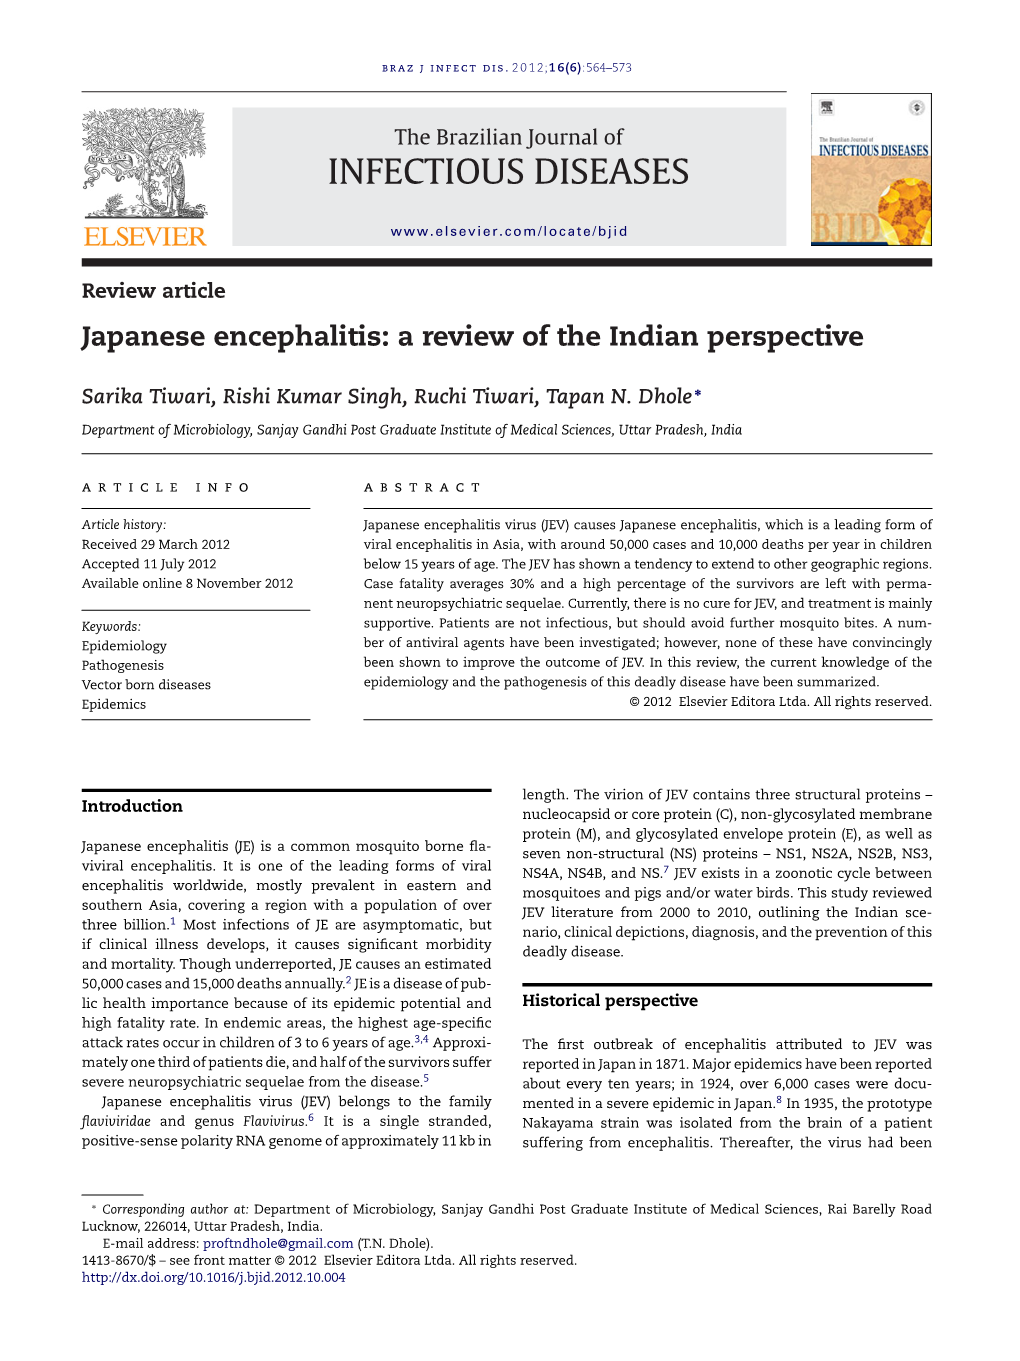 Japanese Encephalitis: a Review of the Indian Perspective